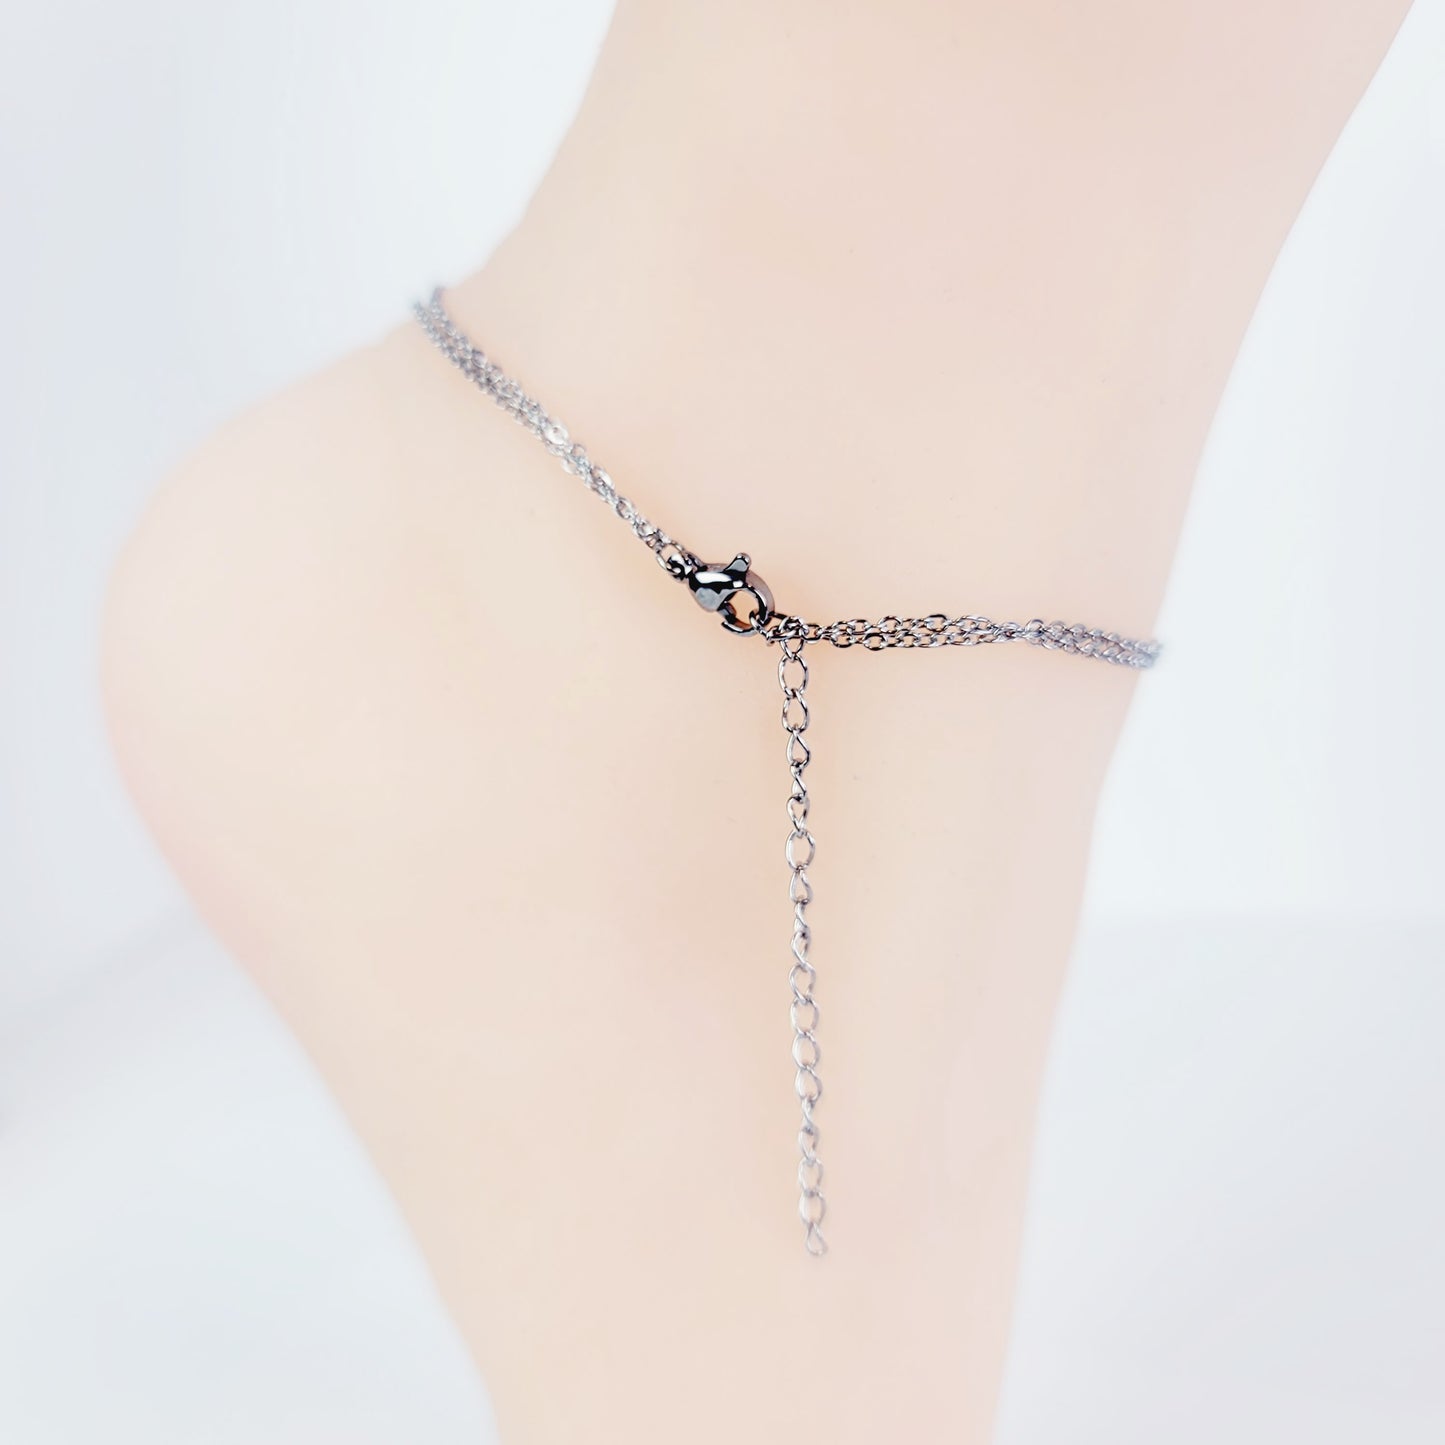 Stainless Steel Circle of O and Heart Double Strand Anklet. Discreet Anklet Day Collar for BDSM Submissive.